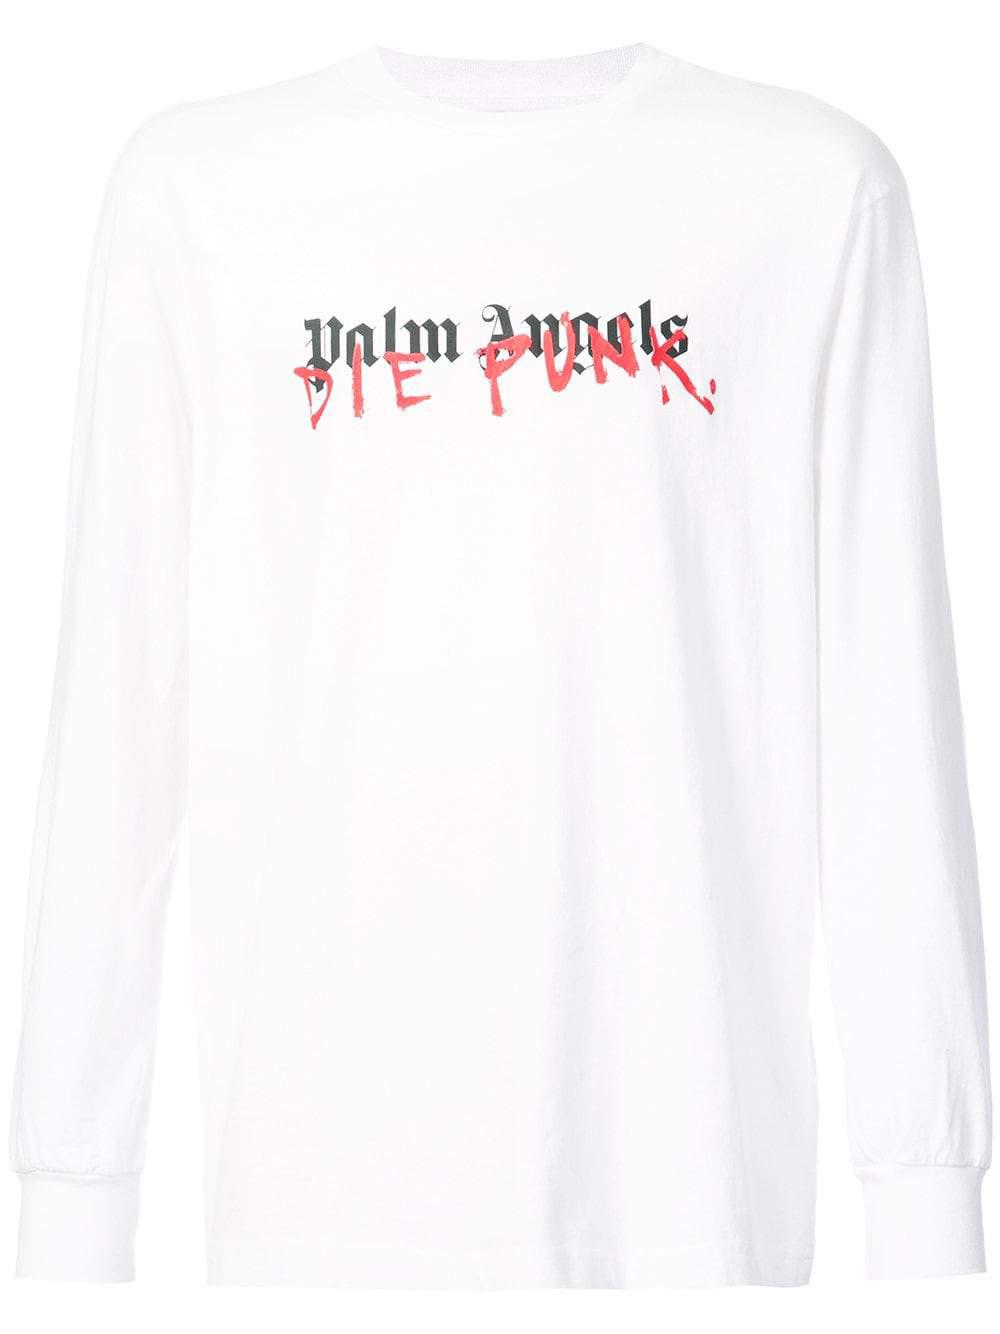 palm angels long sleeve white